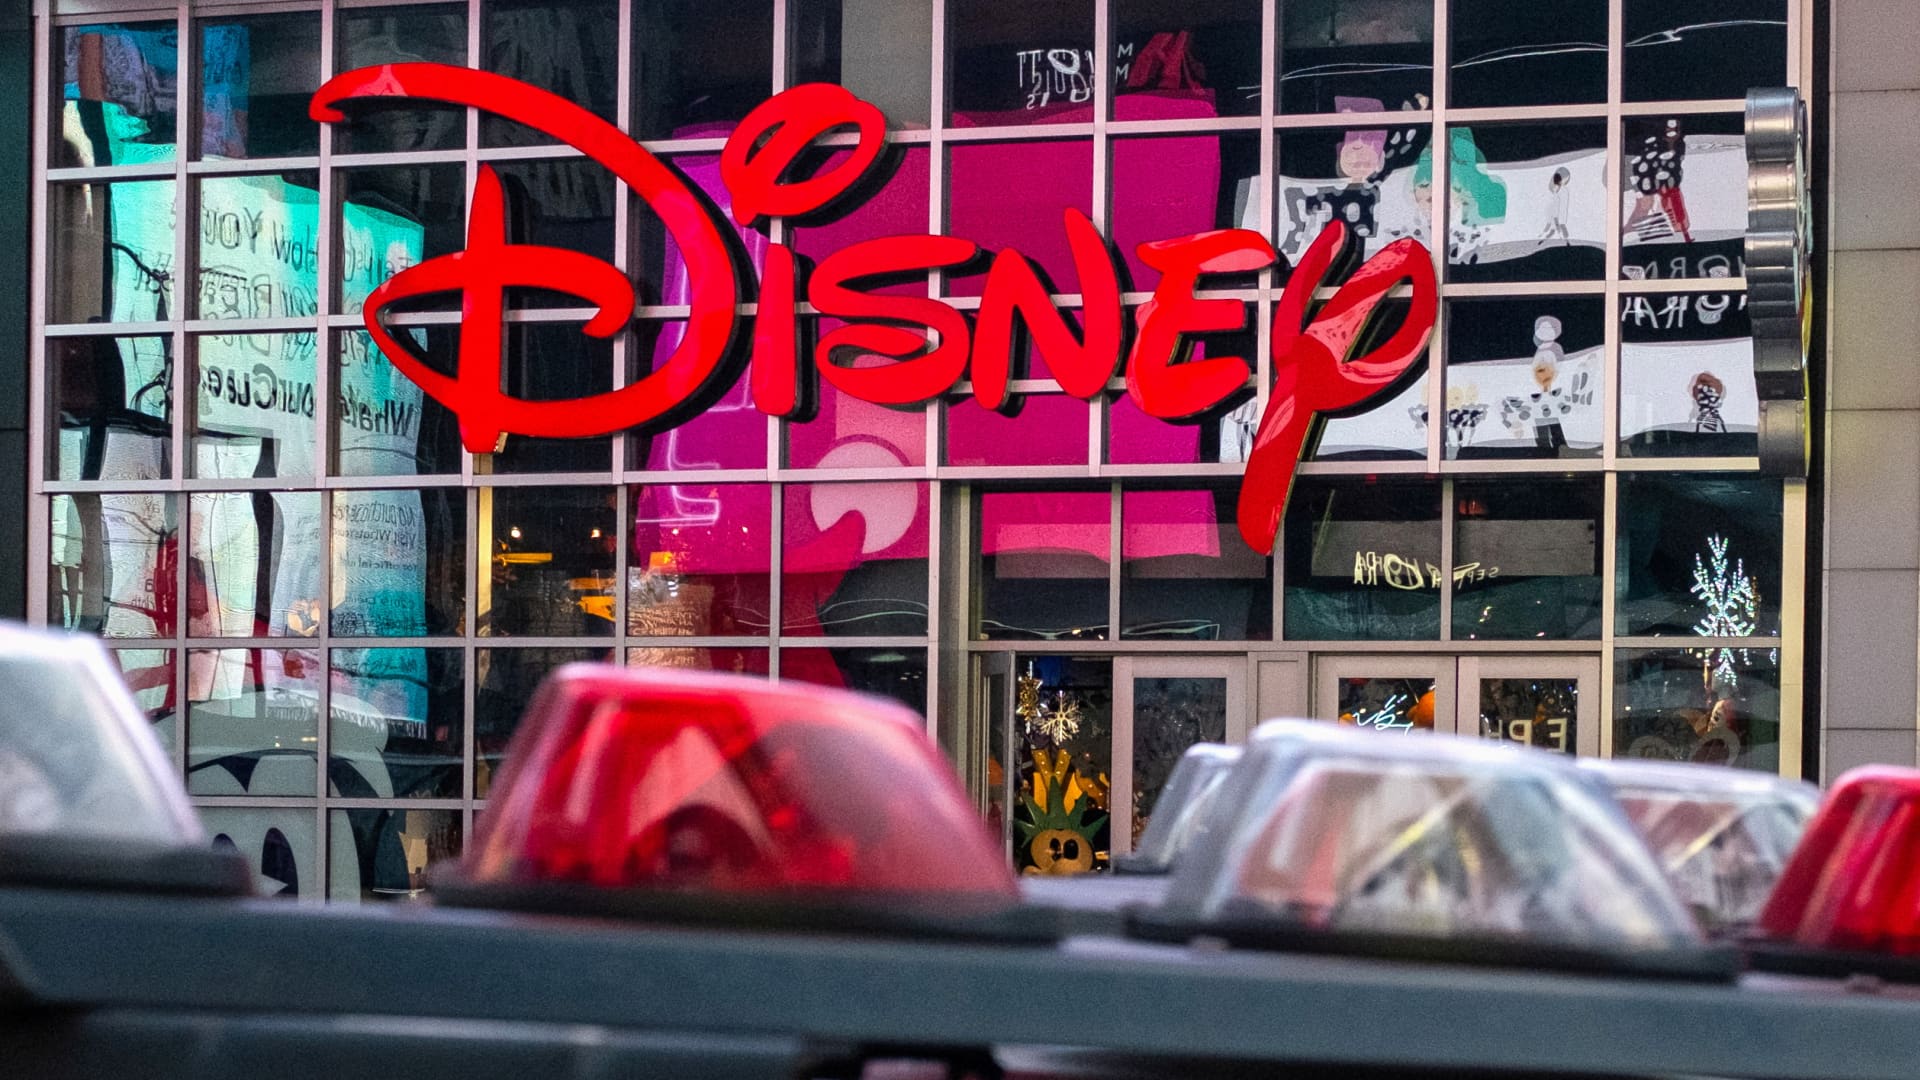 Stocks making the excellent moves after hours: Disney, Bumble, Sonos & more